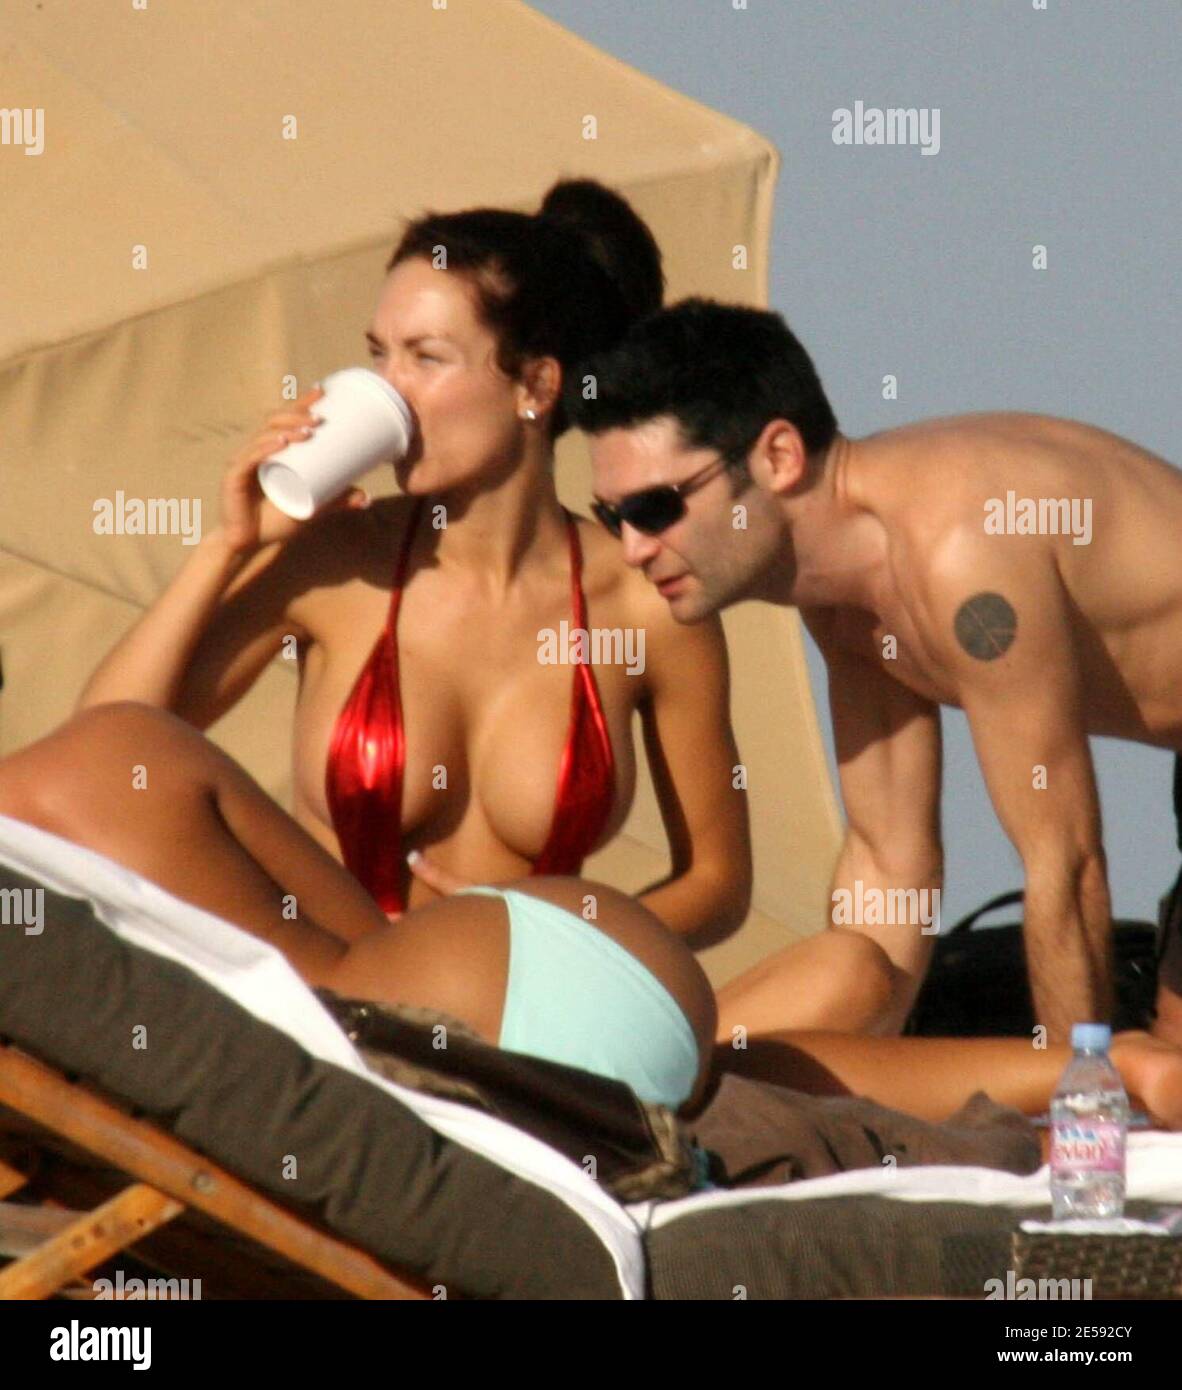 Exclusive!! Corey Feldman and wife Susie spend the day on Miami Beach, FL image